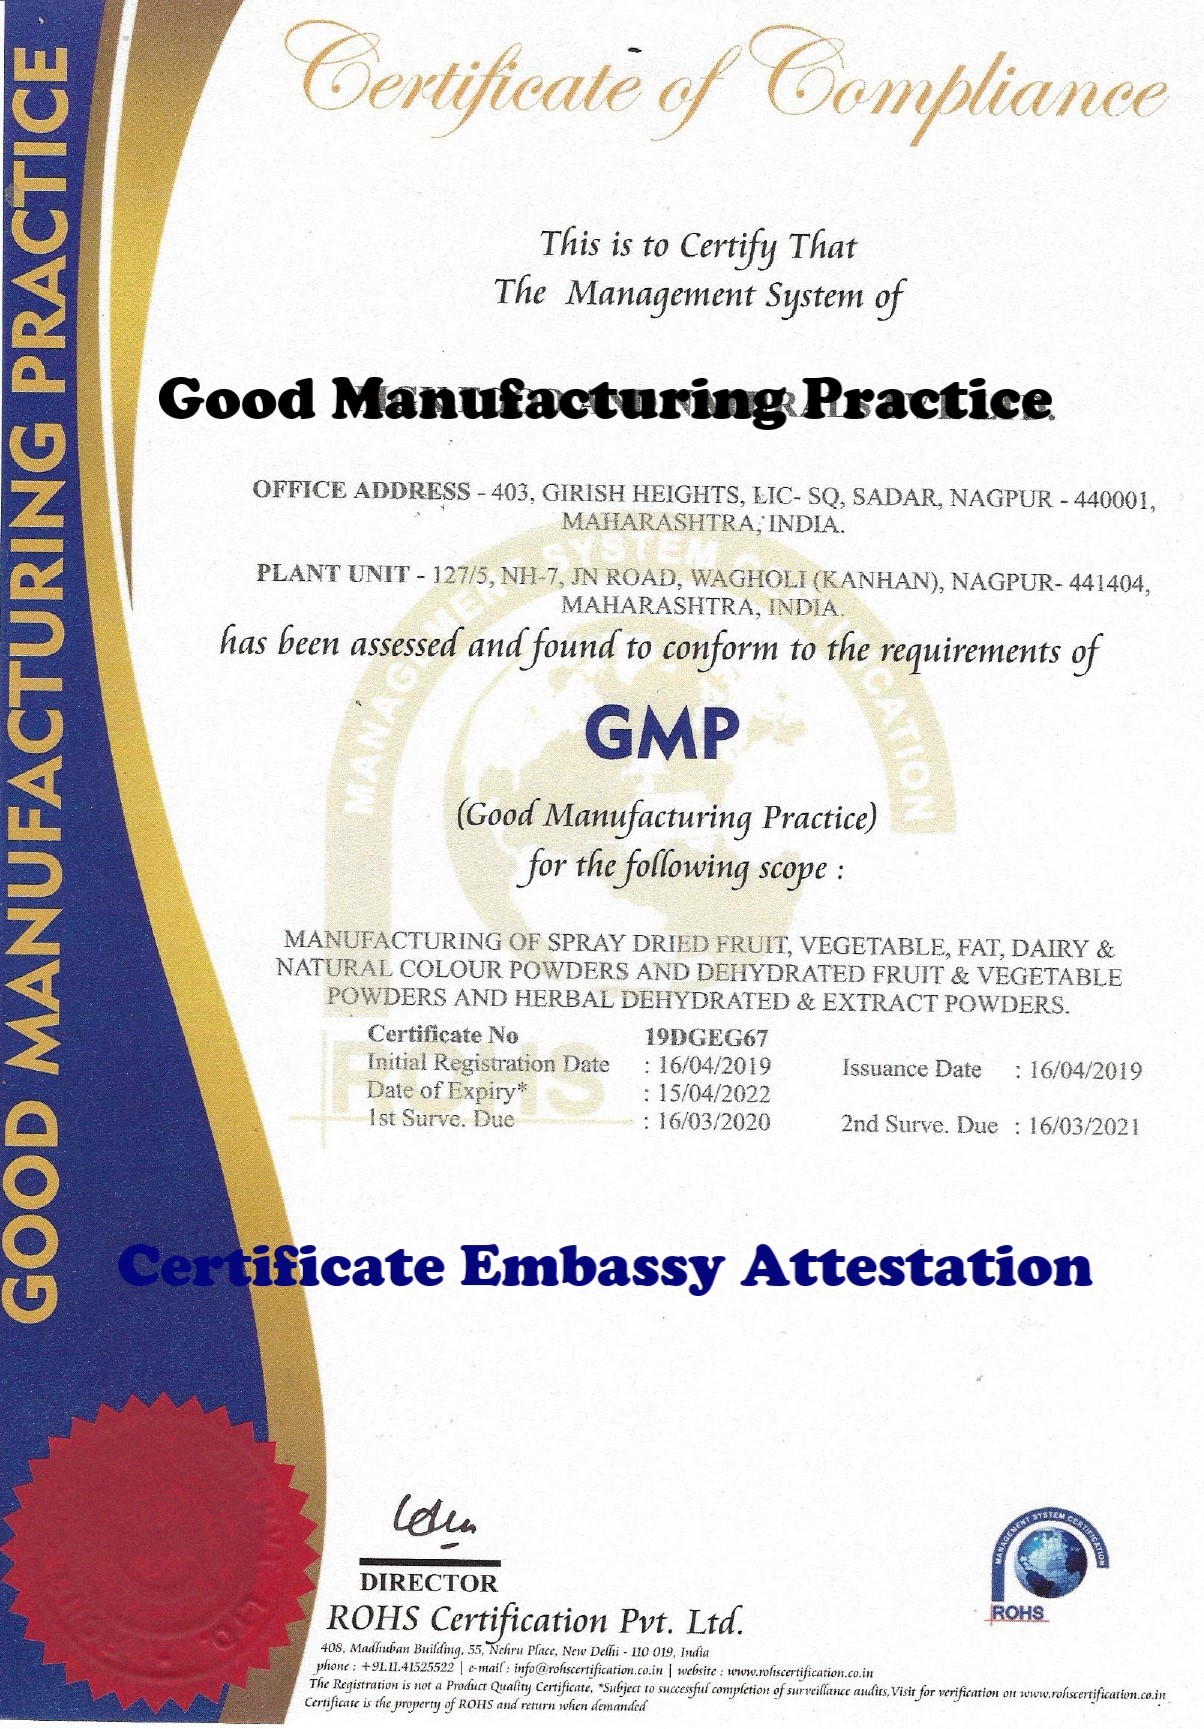 GMP Certificate Attestation from Switzerland Embassy